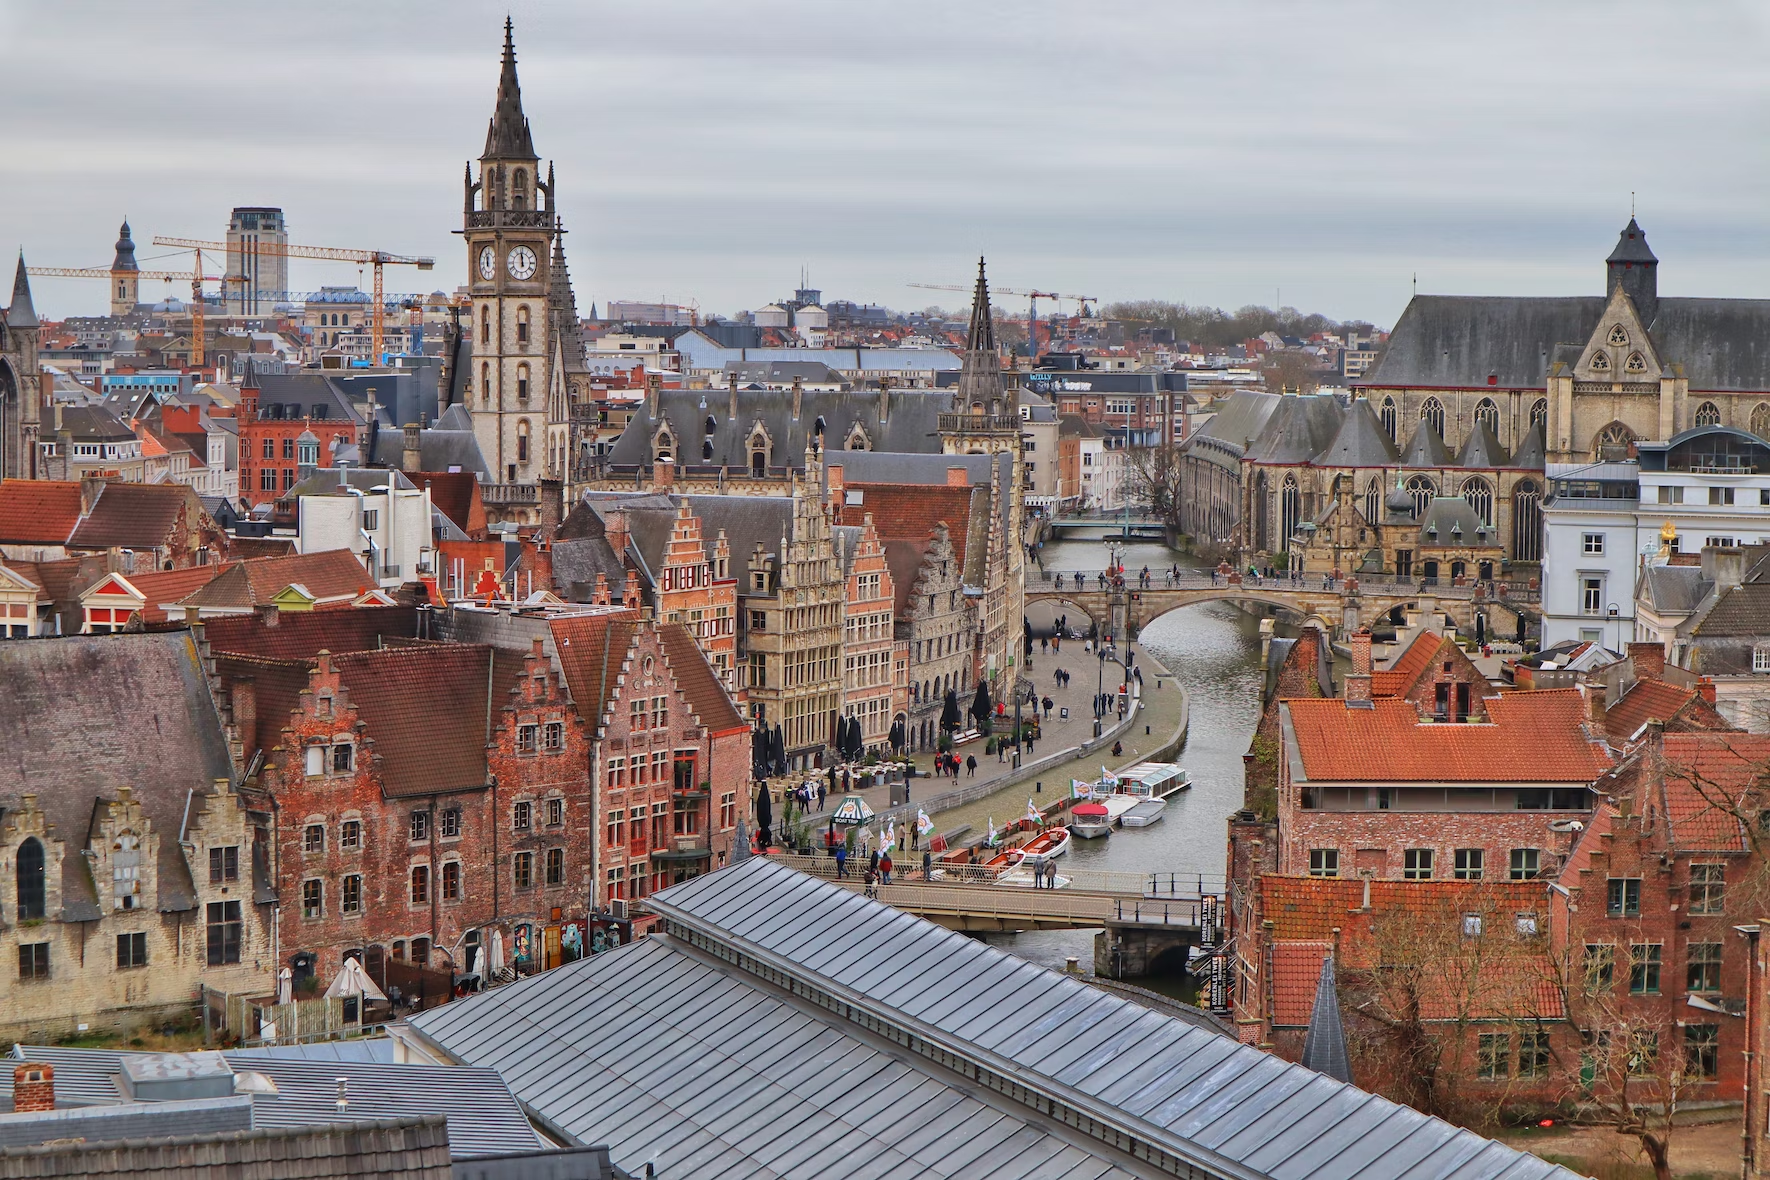 Ghent is one of the cities in Western Europe